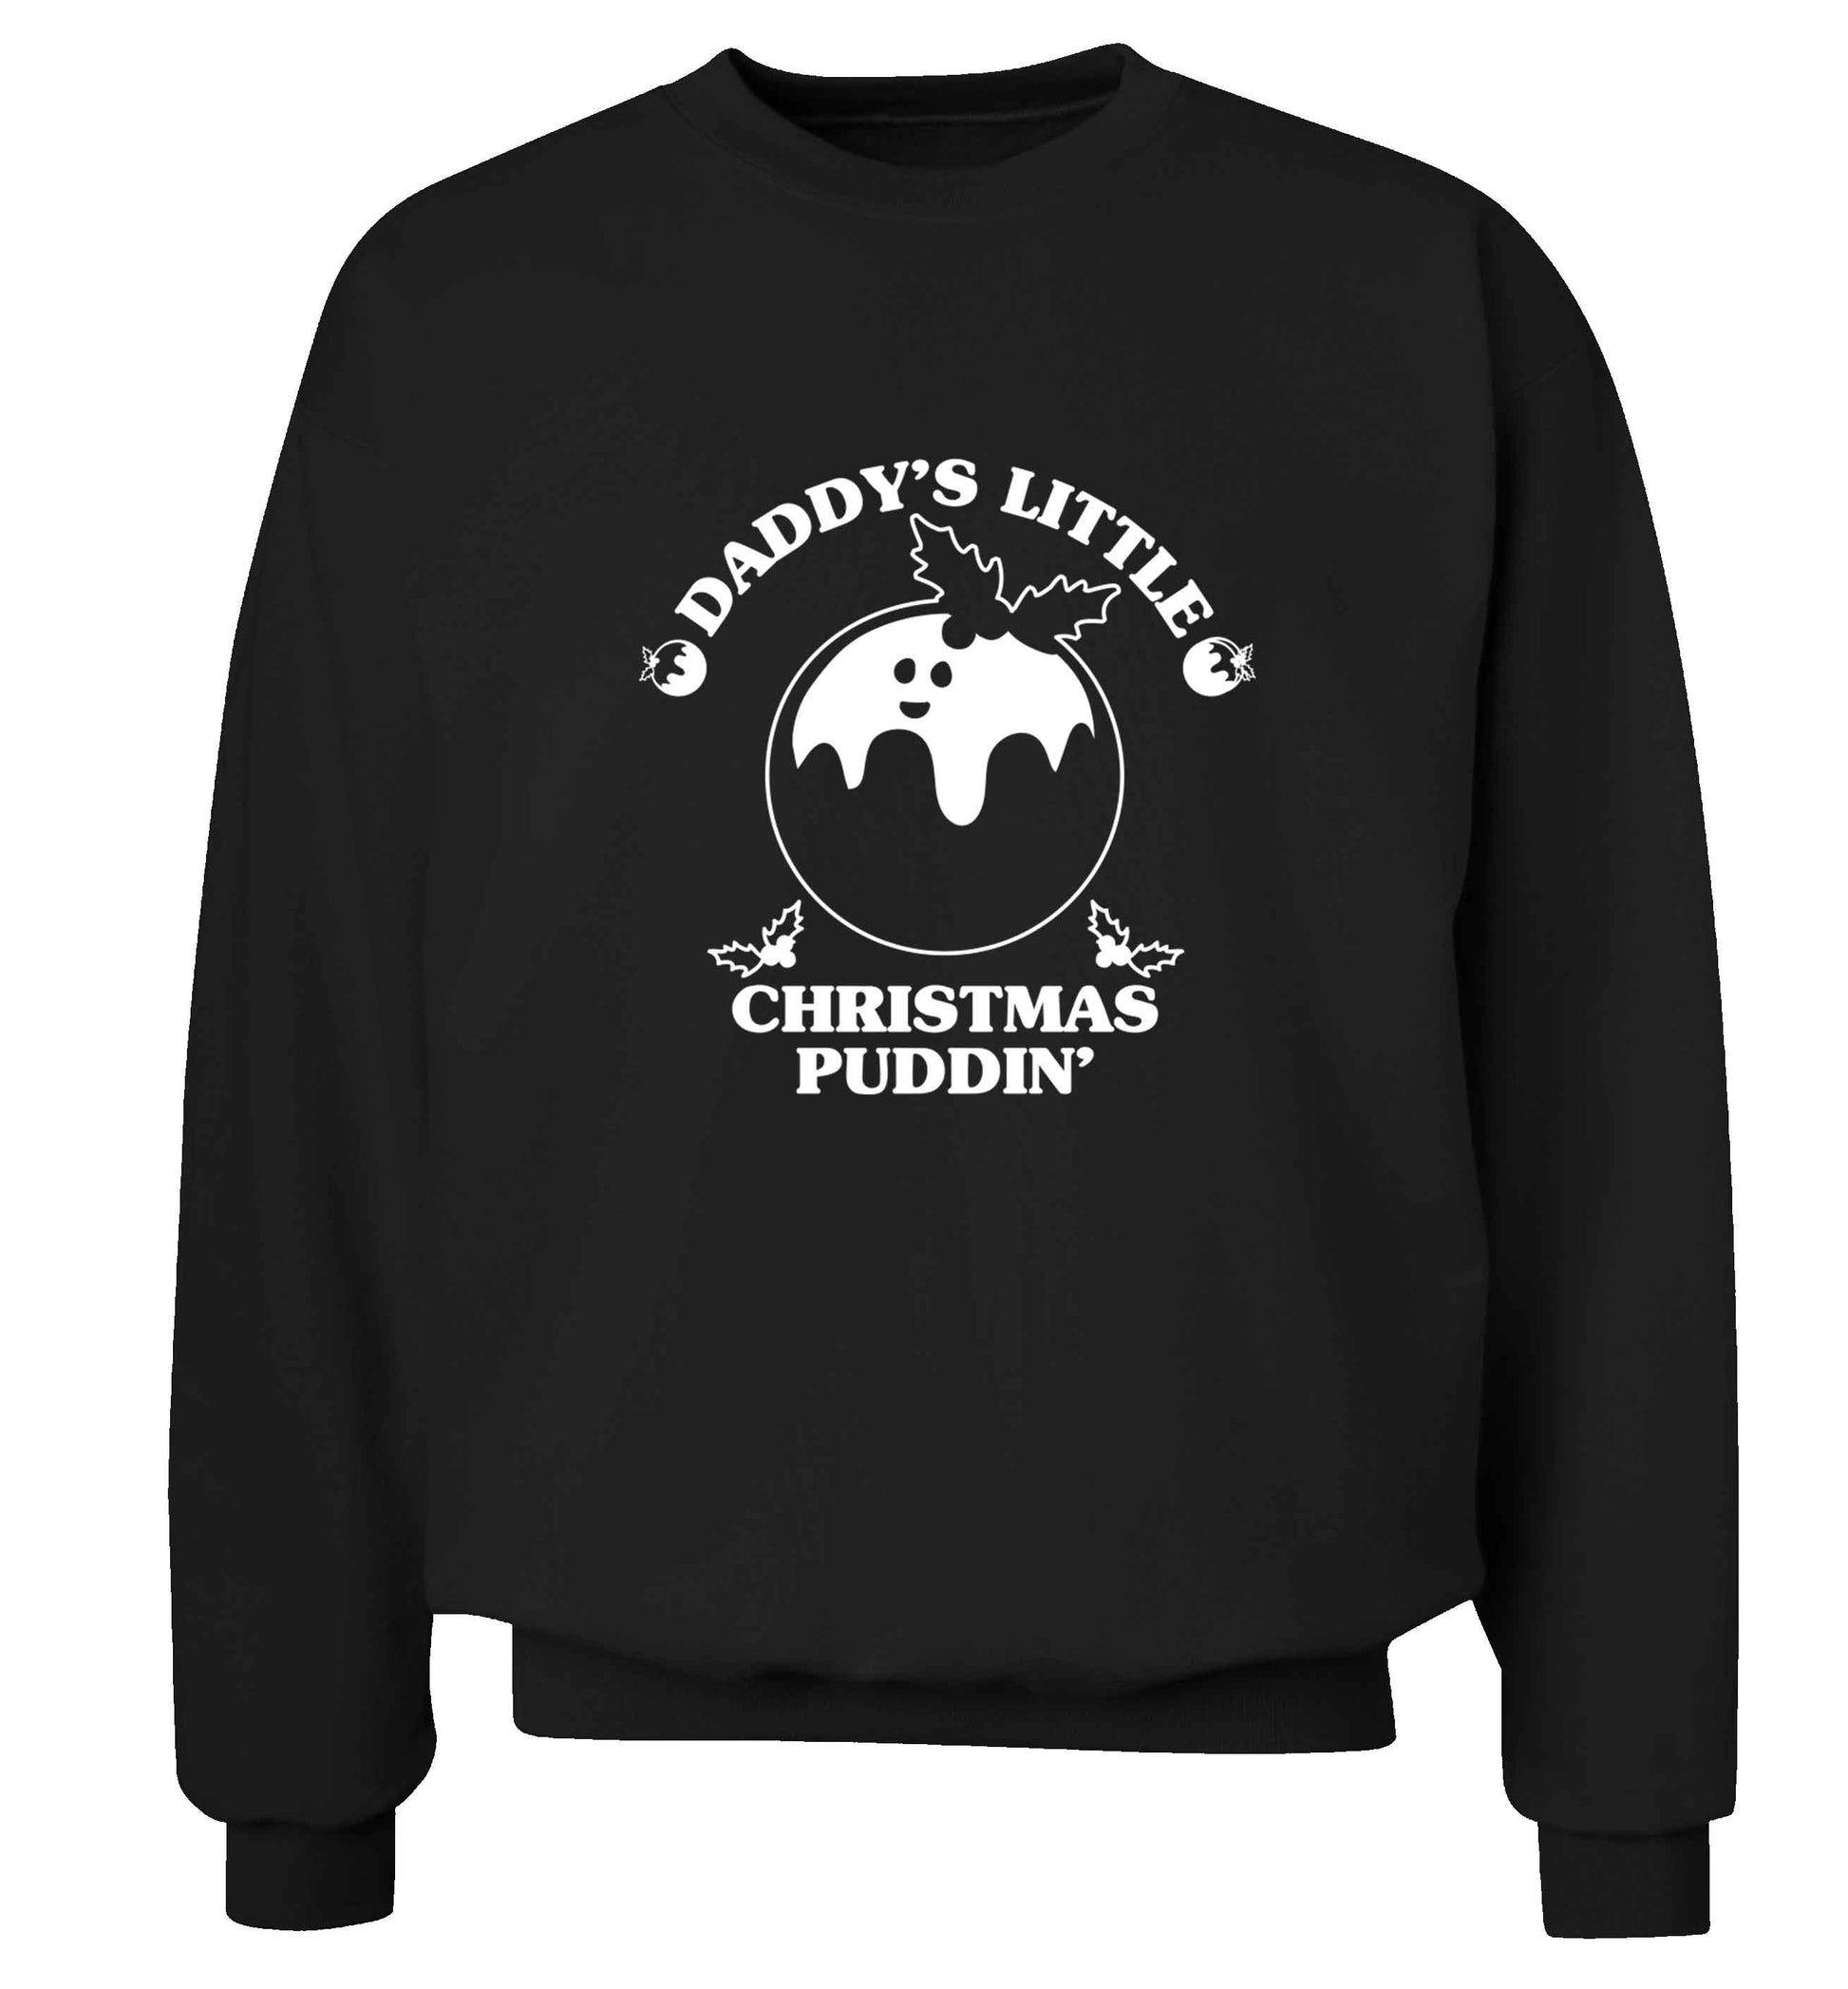 Daddy's little Christmas puddin' Adult's unisex black Sweater 2XL